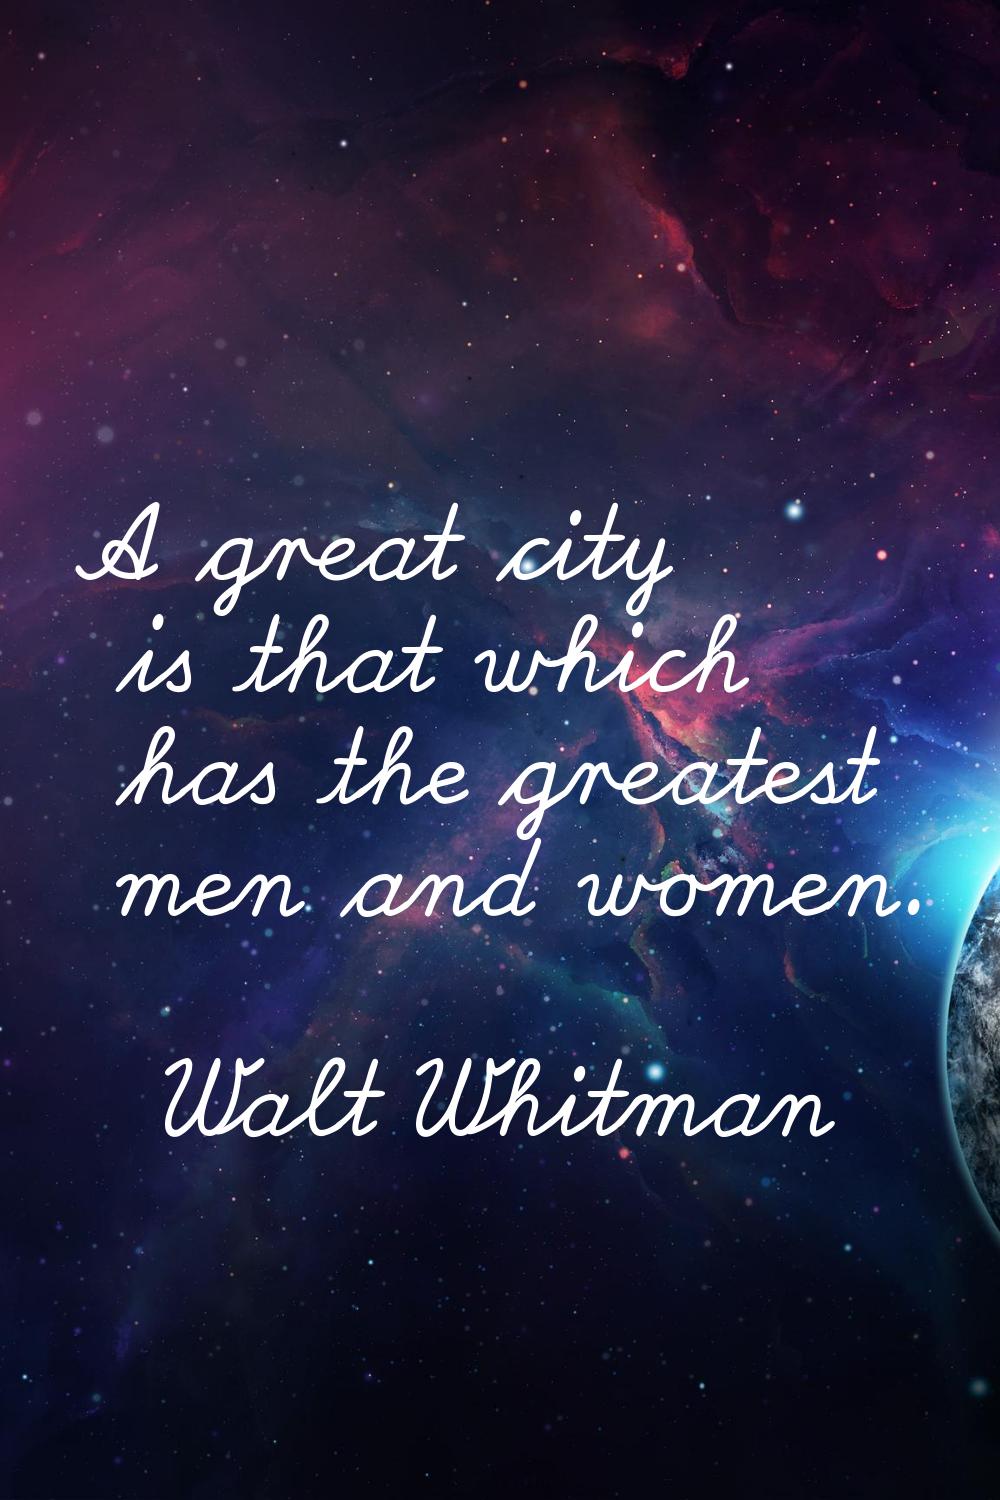 A great city is that which has the greatest men and women.